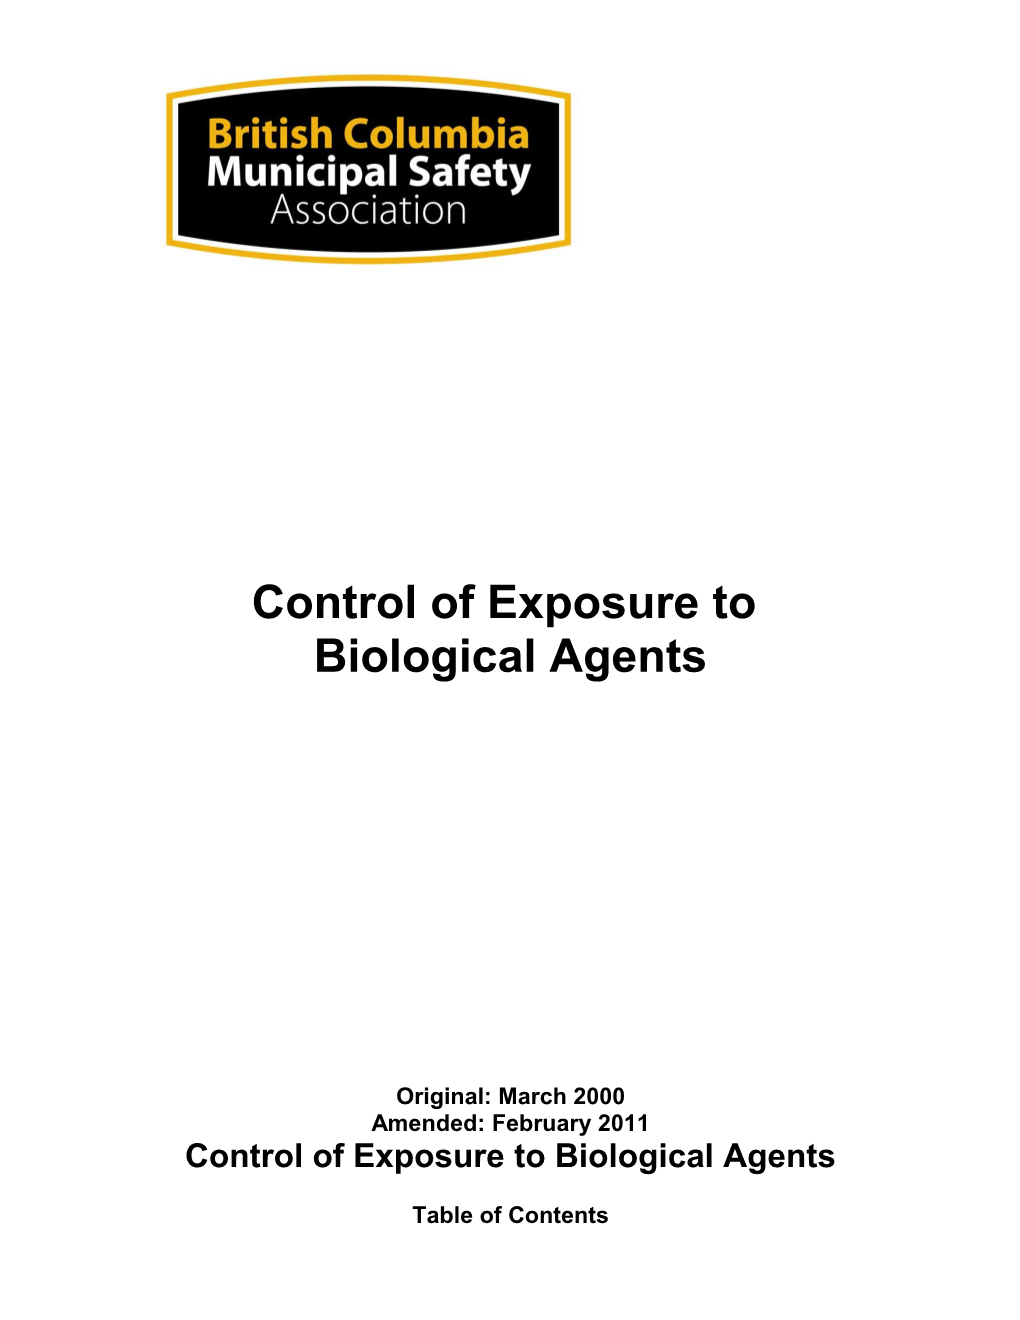 Organization Control of Exposure to Biological Agents Program